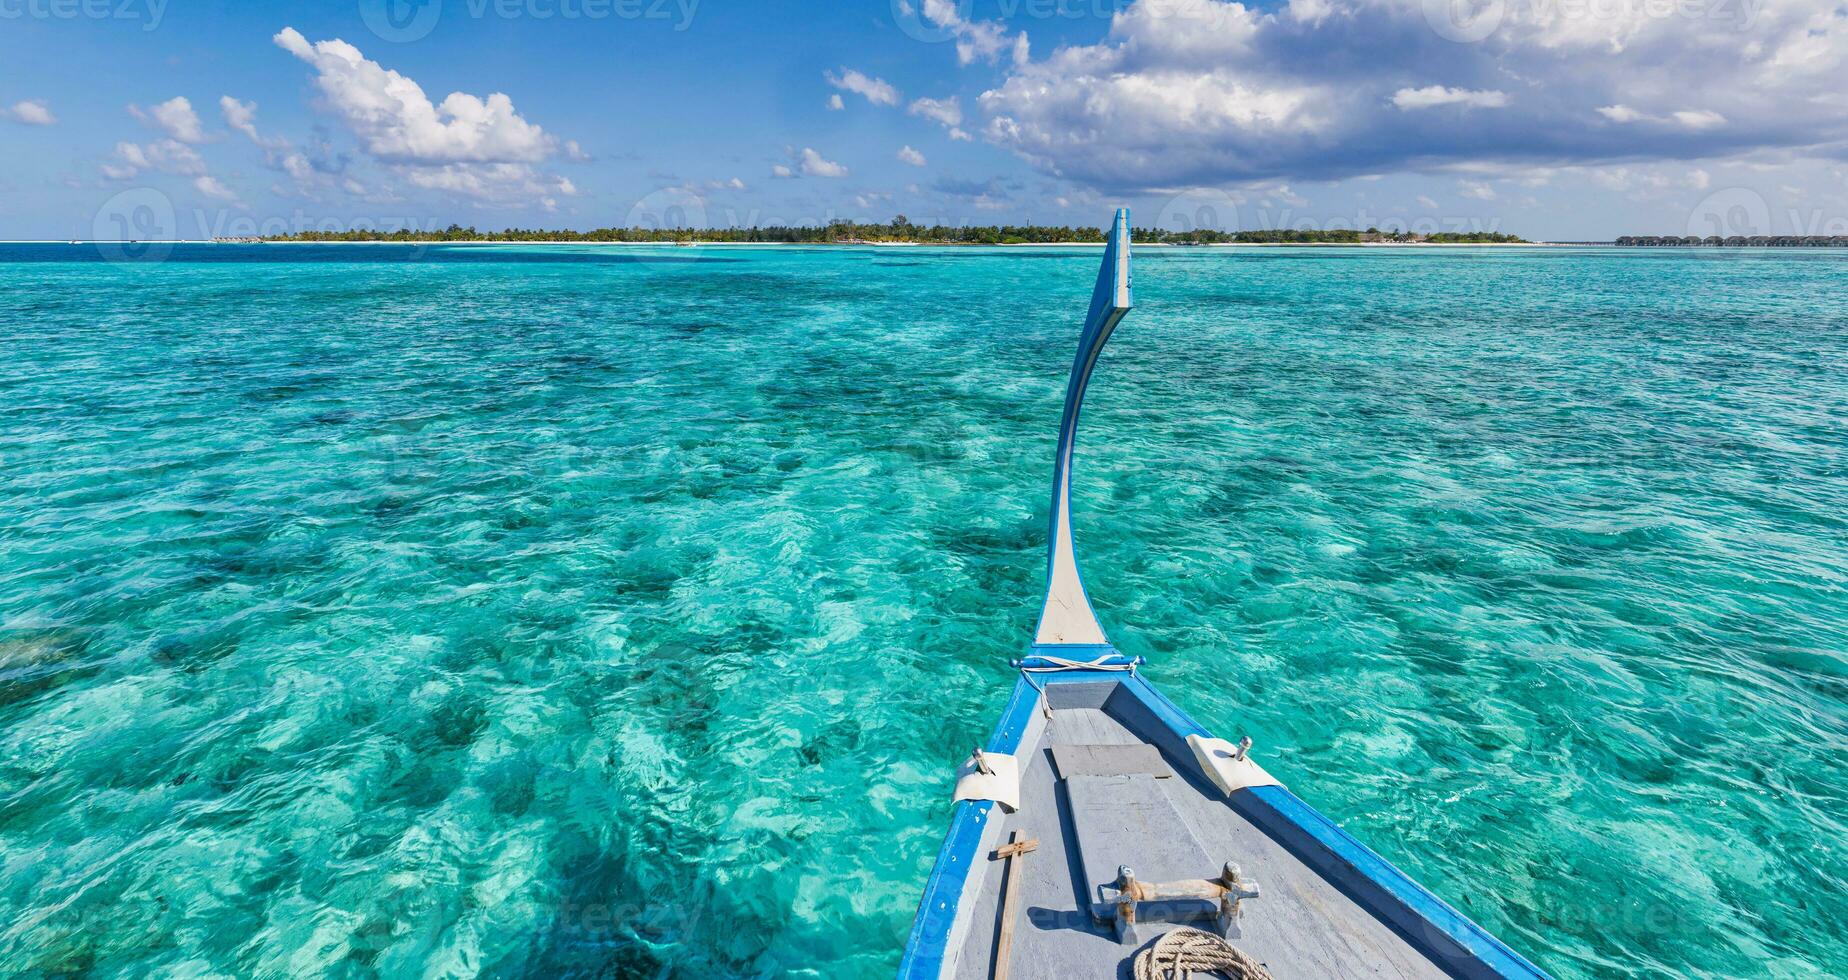 Amazing Maldives beach design. Maldives traditional boat Dhoni front. Perfect blue sea with ocean lagoon. Luxury tropical paradise concept. Beautiful vacation travel landscape. Tranquil ocean lagoon photo